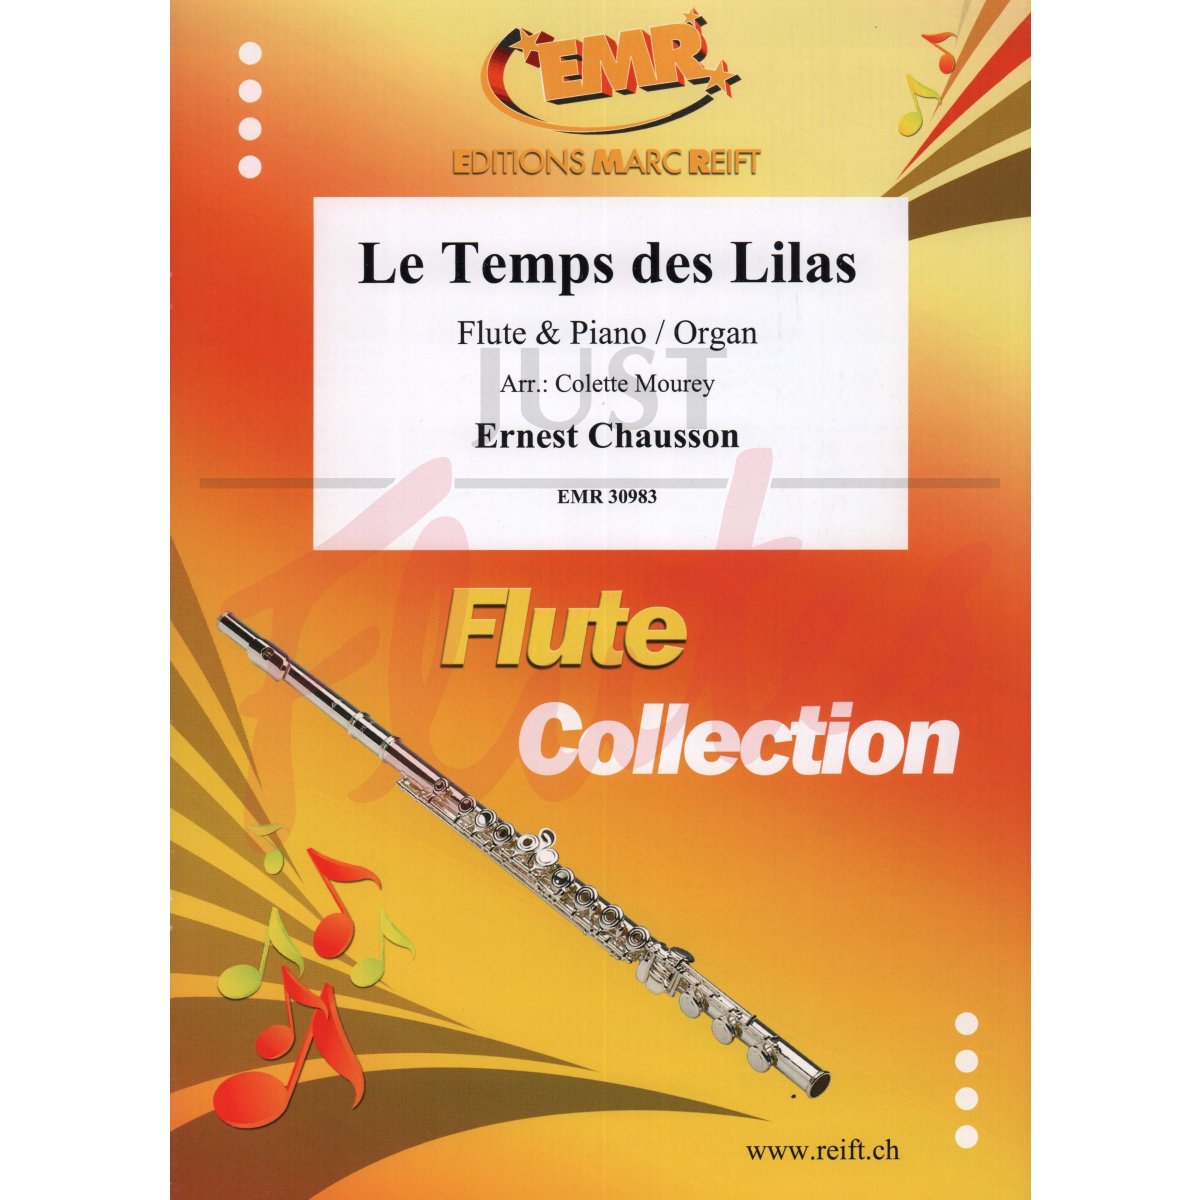 Le Temps des Lilas for Flute and Piano